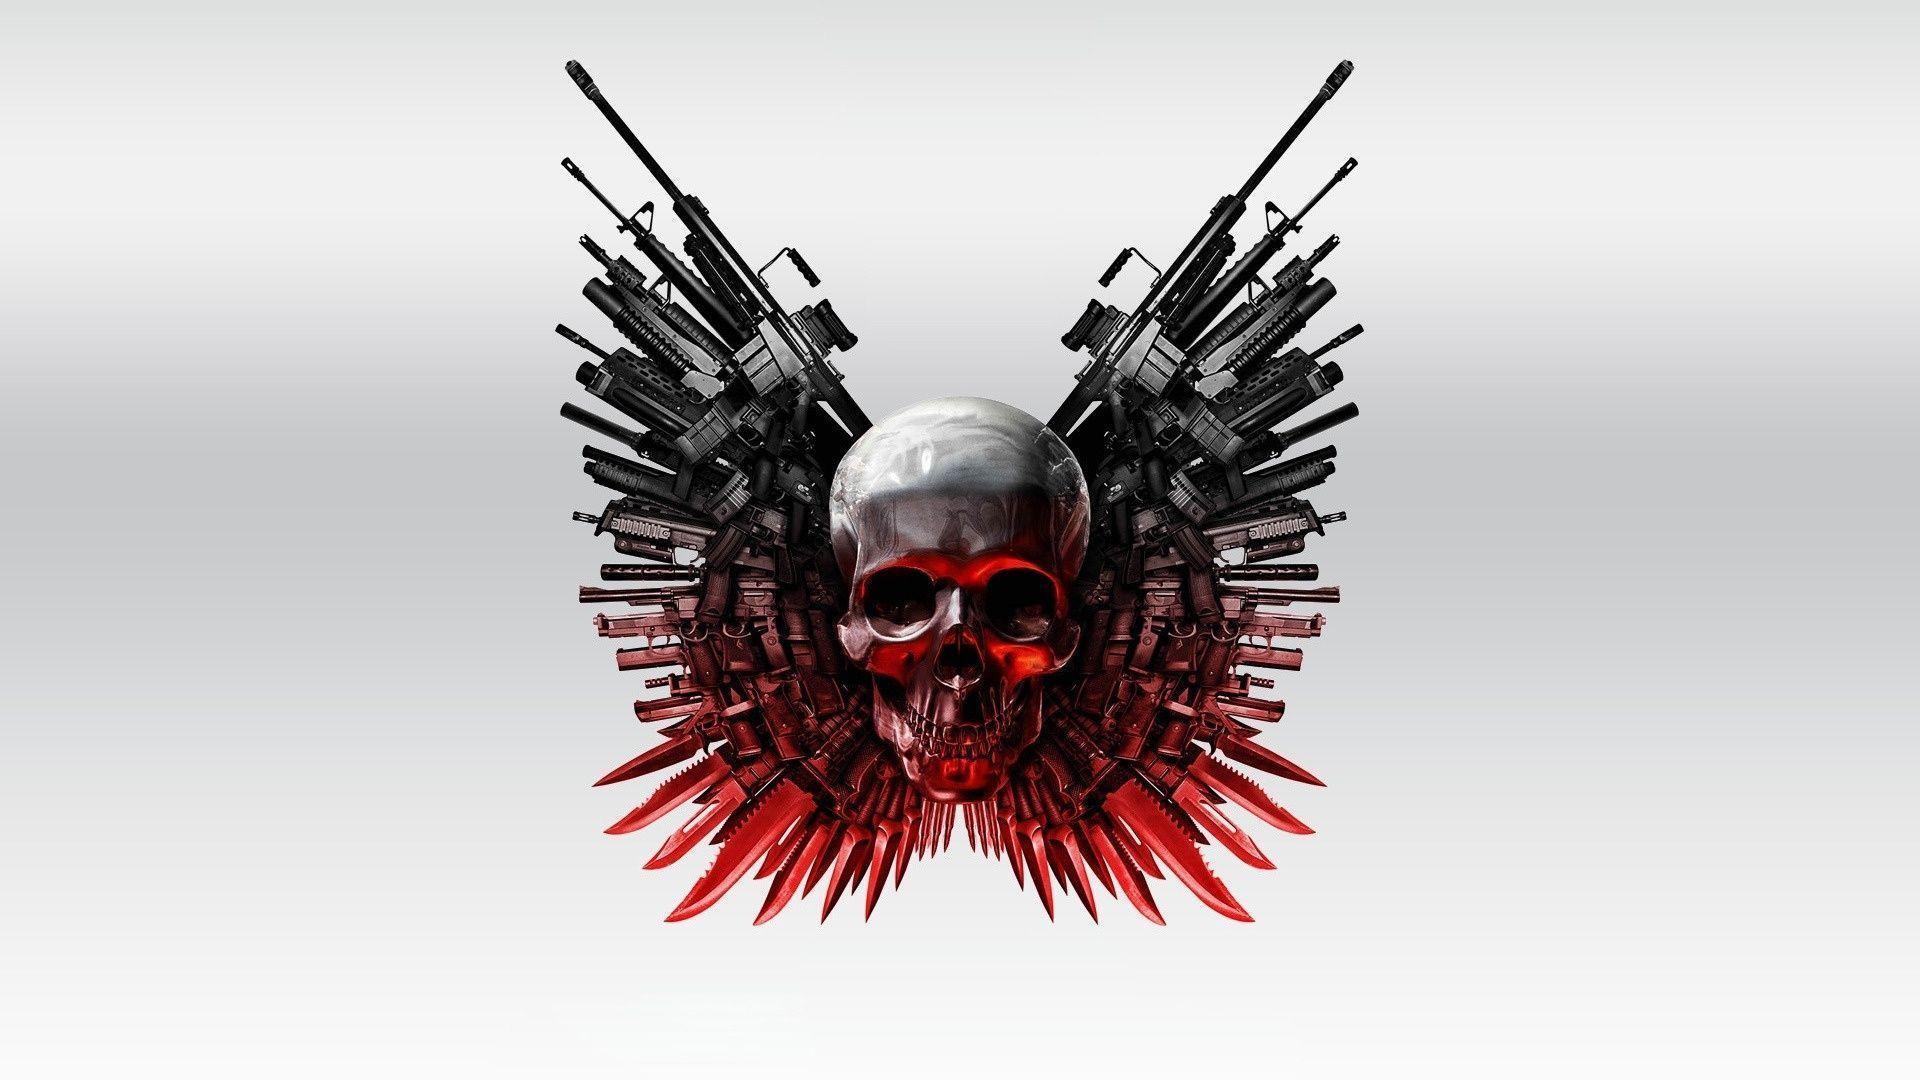 3D Wallpaper: Weapons and skull